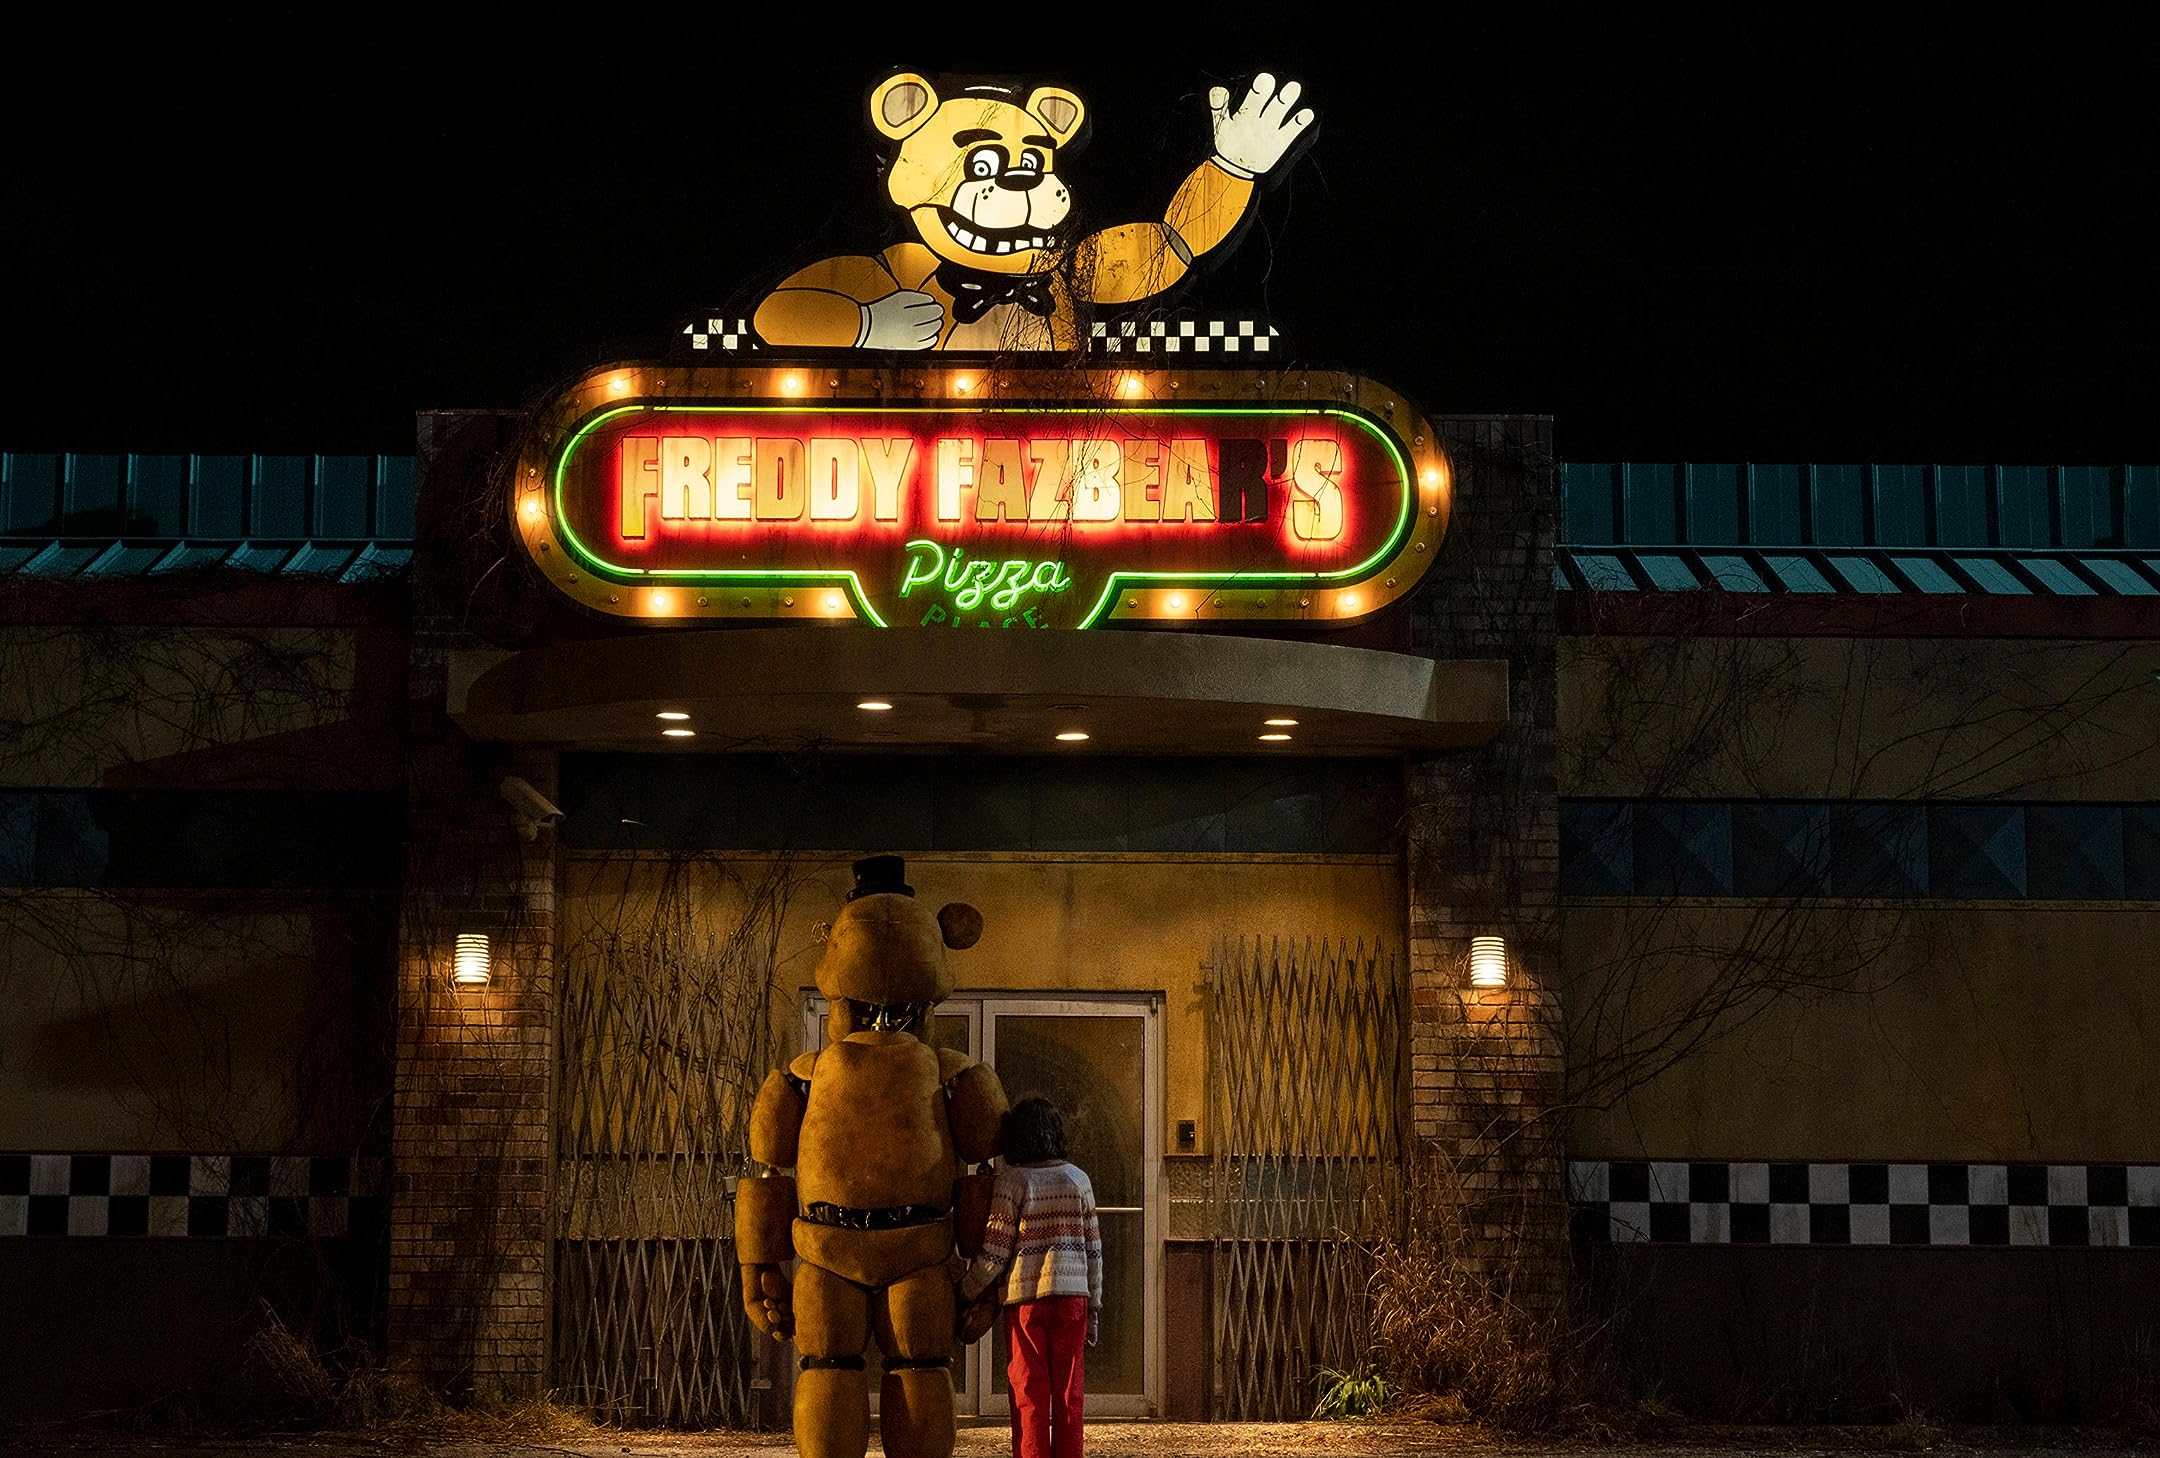 Five Nights at Freddy’s location pops up in Los Angeles